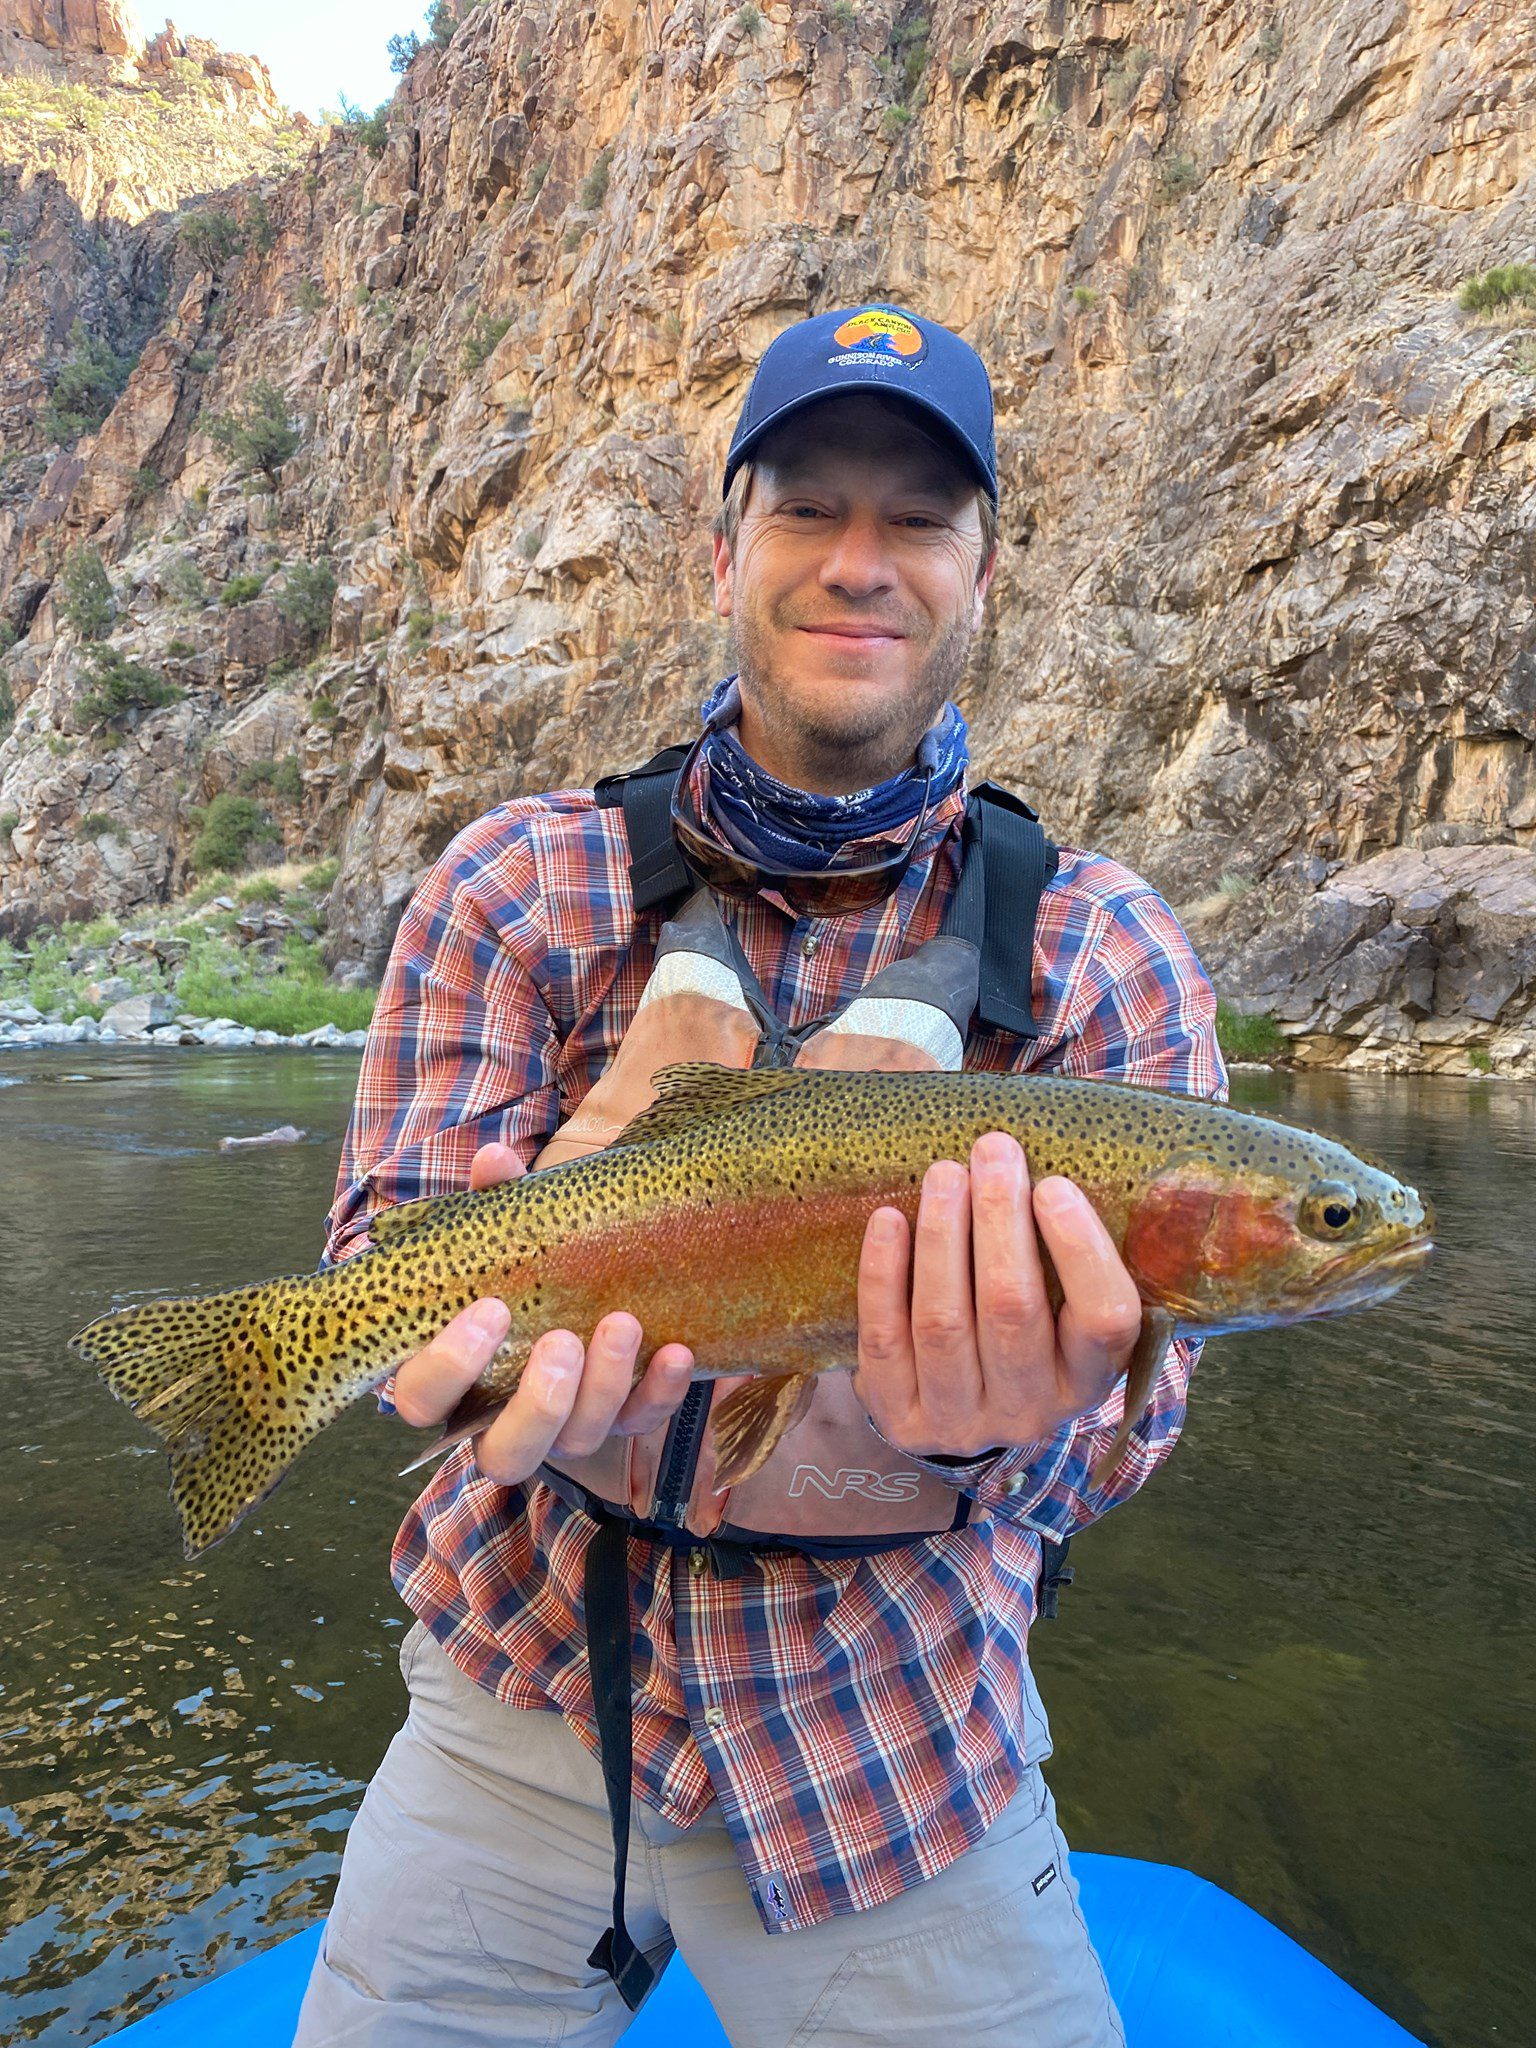 https://outdoors-international.com/wp-content/uploads/2021/05/Lower-Gunnison-River-Fly-Fishing-Float-Trips-with-Black-Canyon-Anglers-Rainbow-Trout-3.jpg